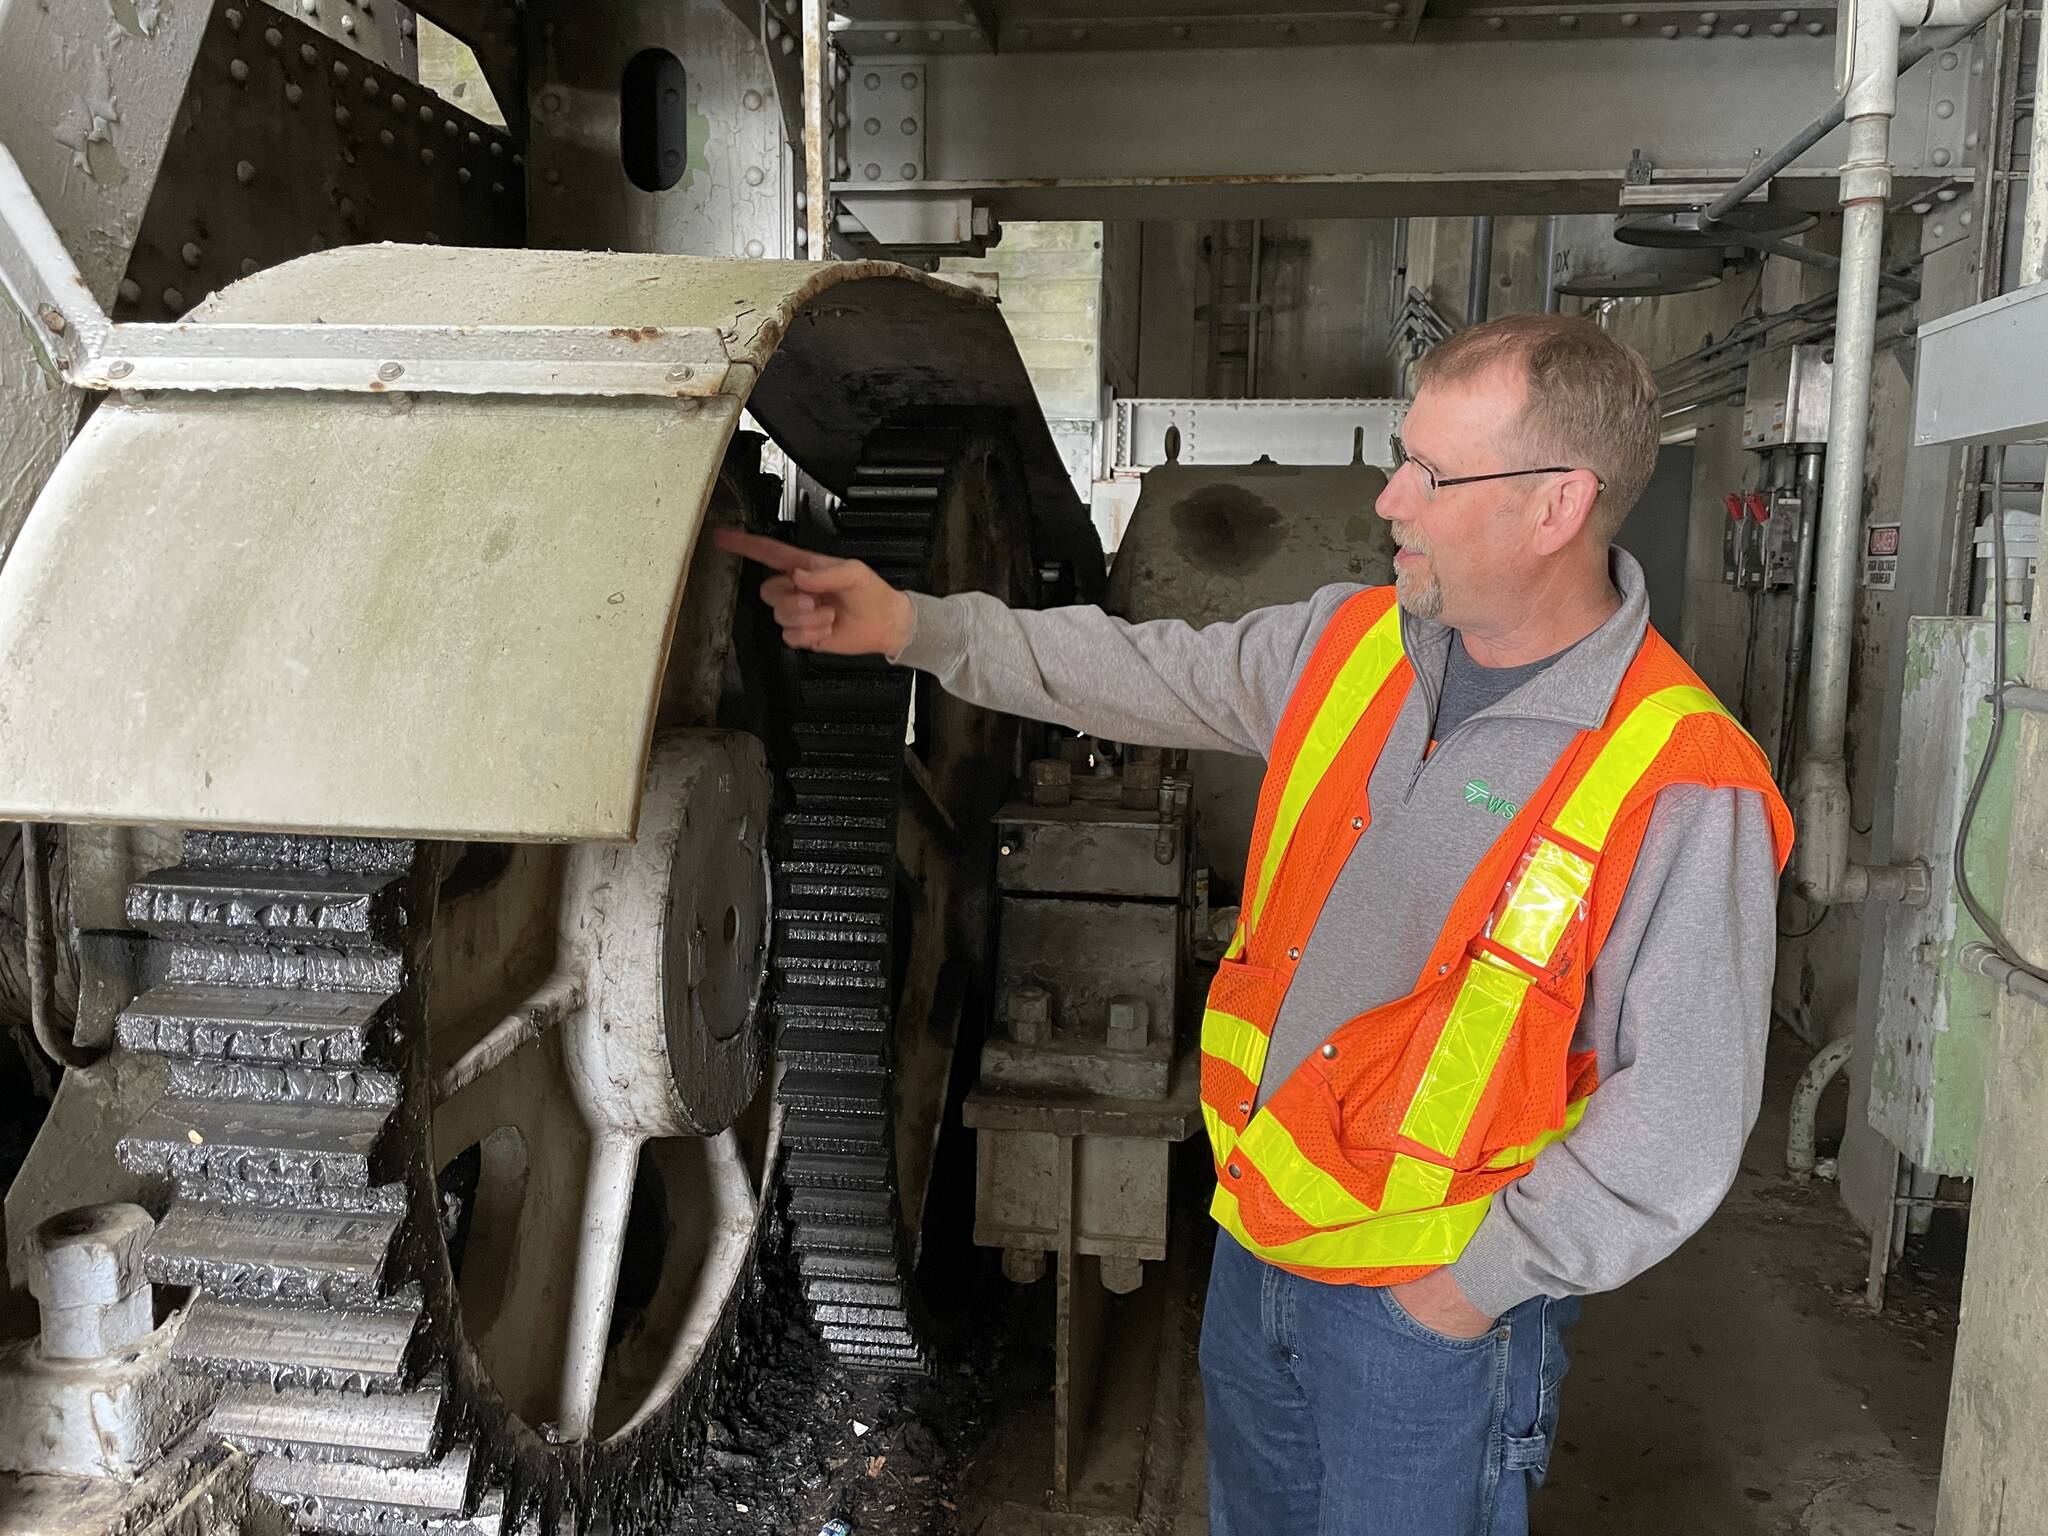 Michael S. Lockett / The Daily World
Dave Reibel, supervisor for the Washington Department of Transportation bridge maintenance team in the area, gestures at the mechanisms that operate the Chehalis River Bridge on May 16.